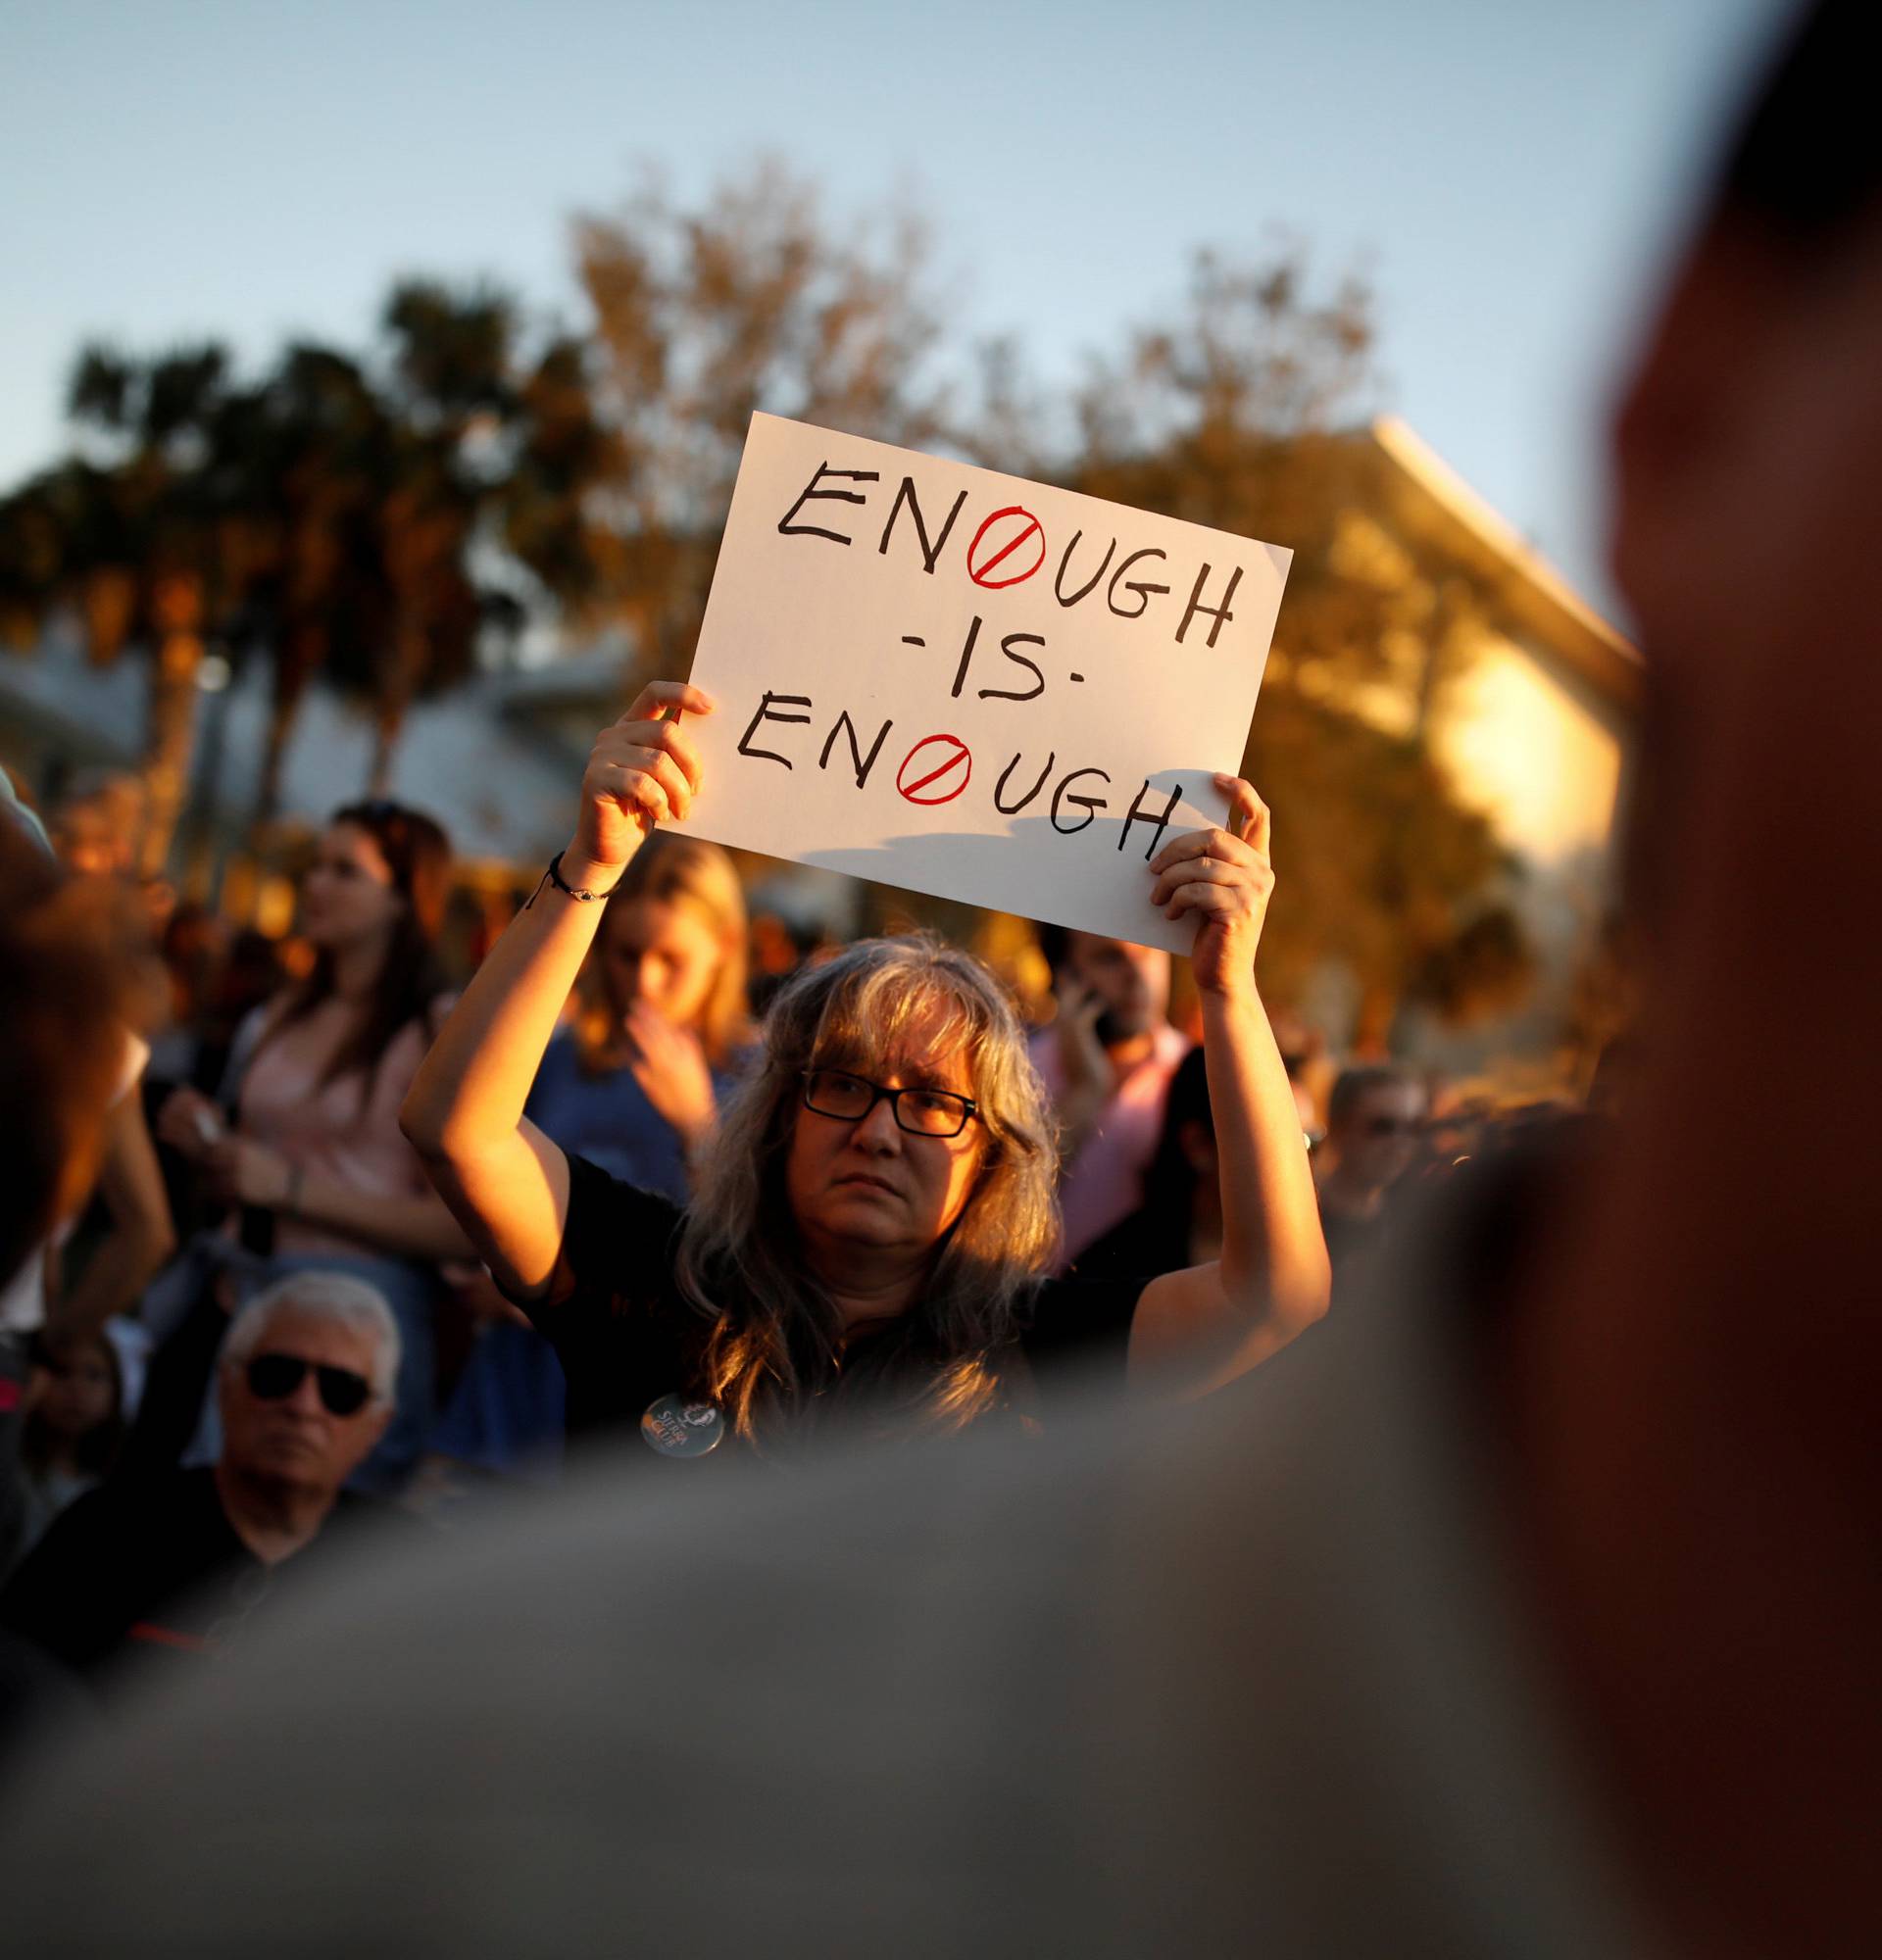 A woman holds a placard during a candlelight vigil for victims of yesterday's shooting at nearby Marjory Stoneman Douglas High School, in Parkland